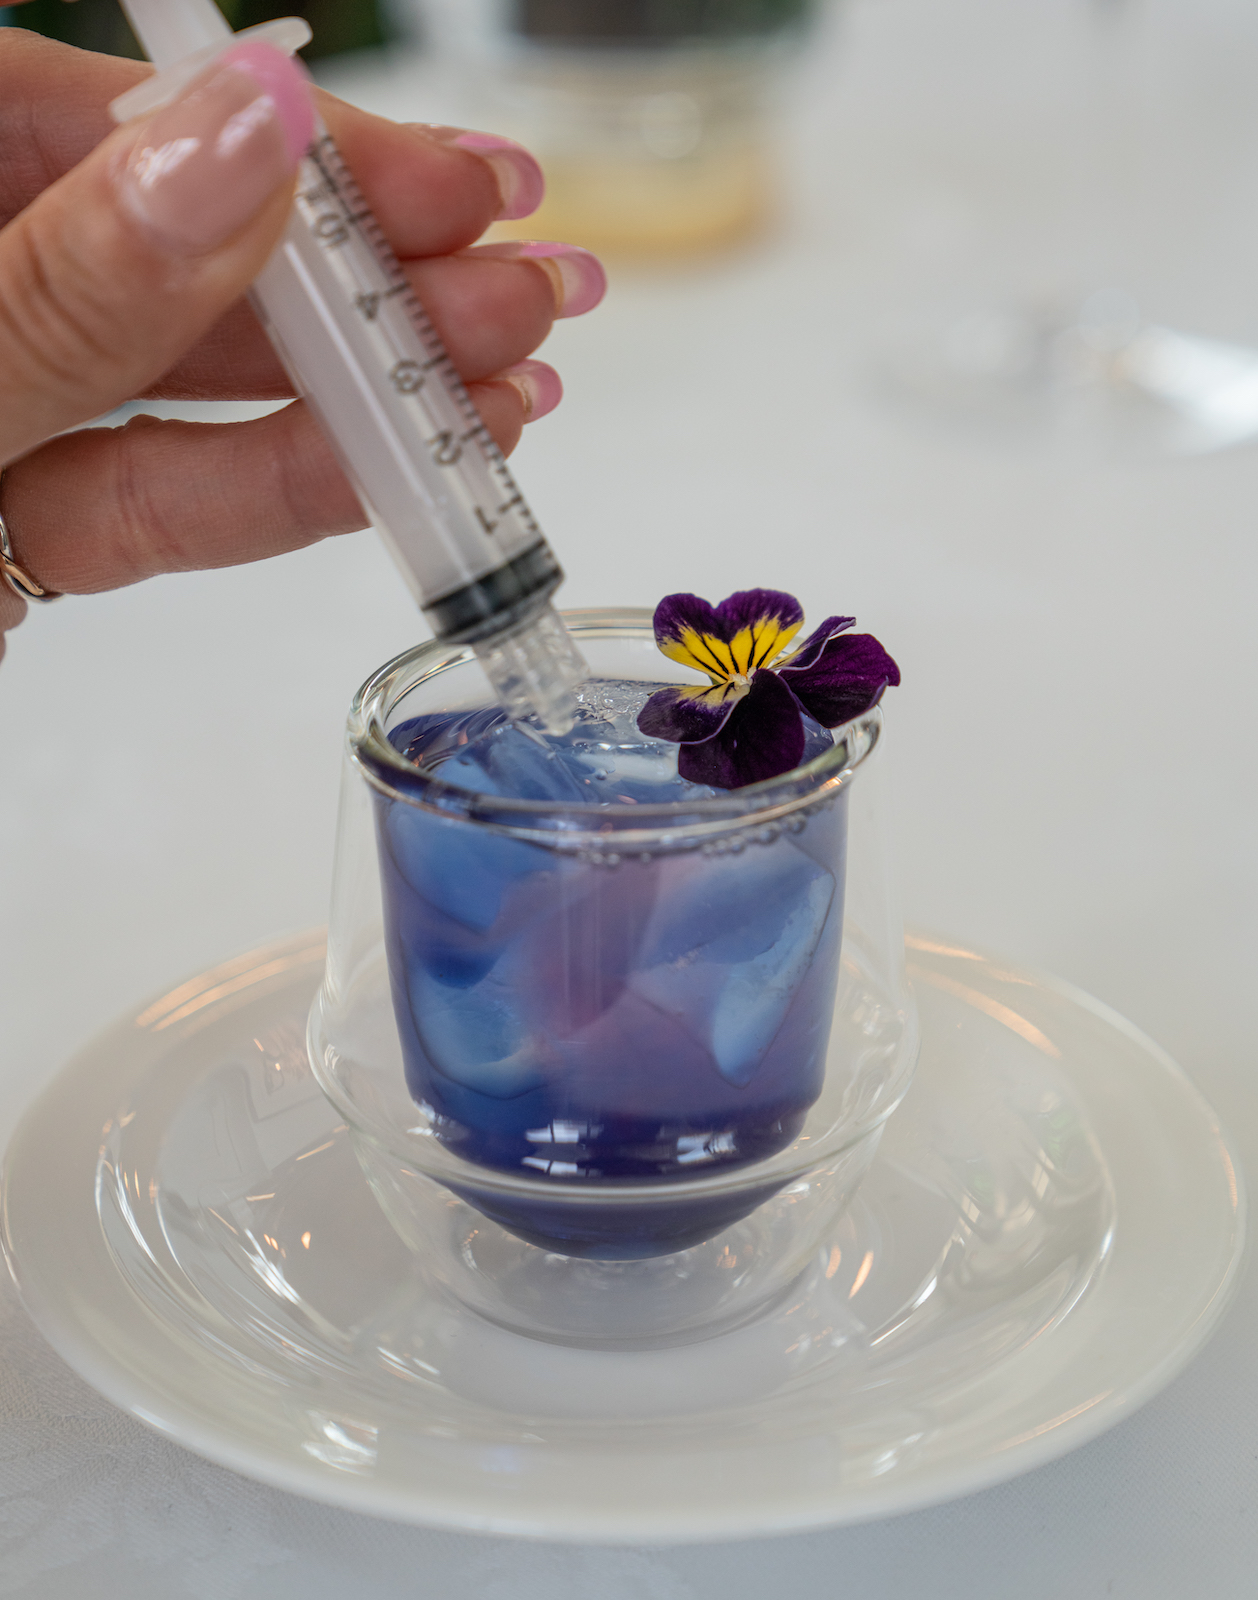 Syringe adding colour and flavour to a drink